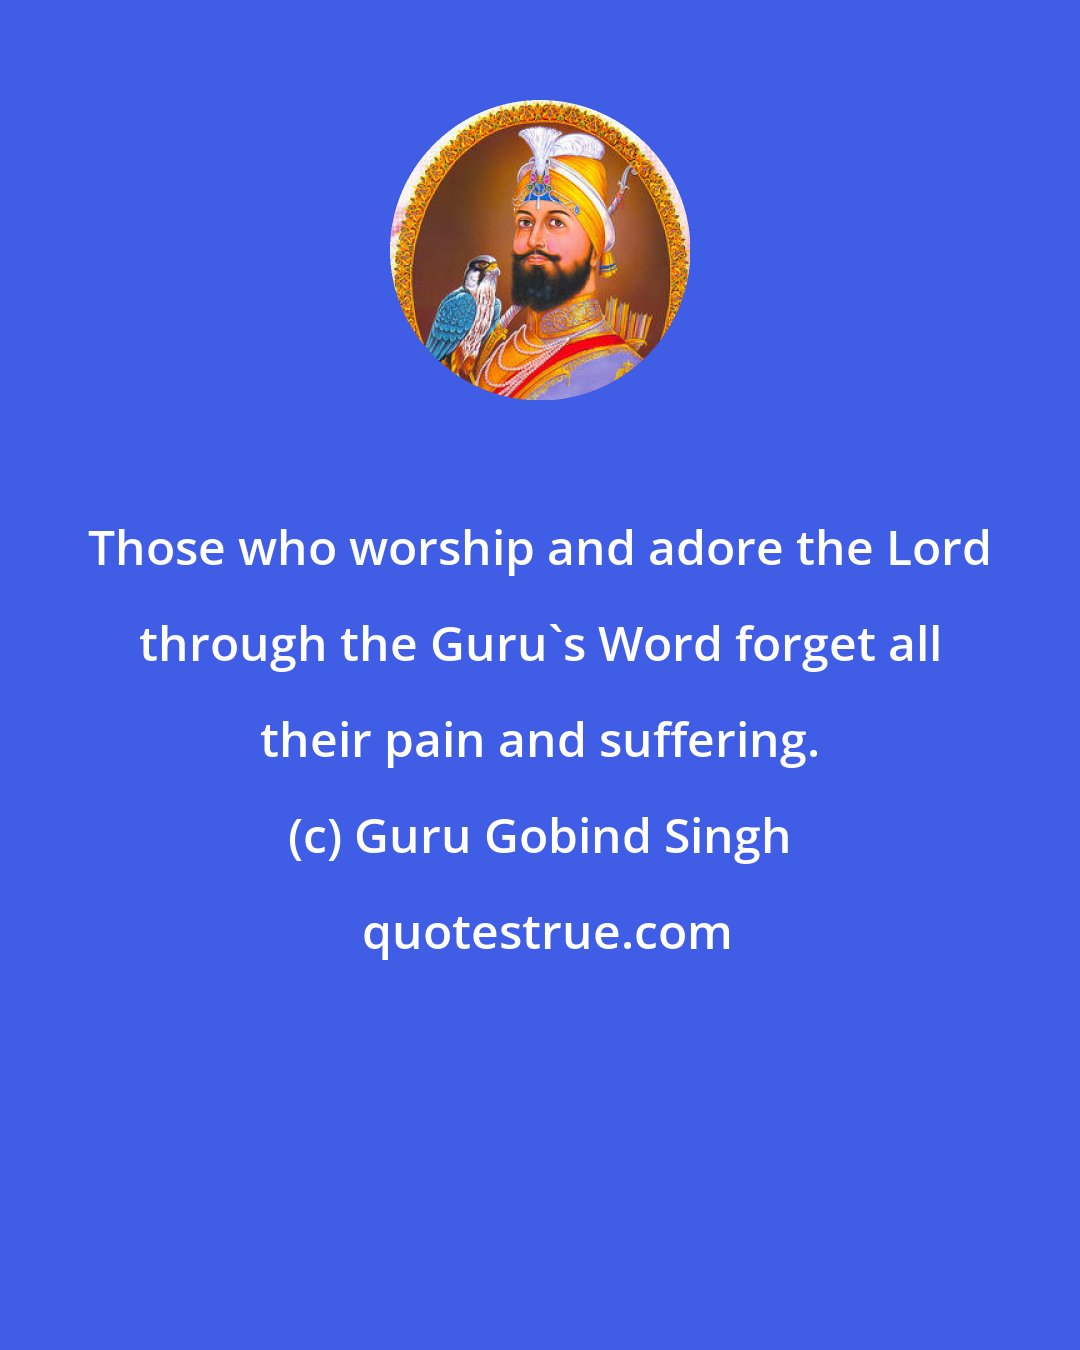 Guru Gobind Singh: Those who worship and adore the Lord through the Guru's Word forget all their pain and suffering.